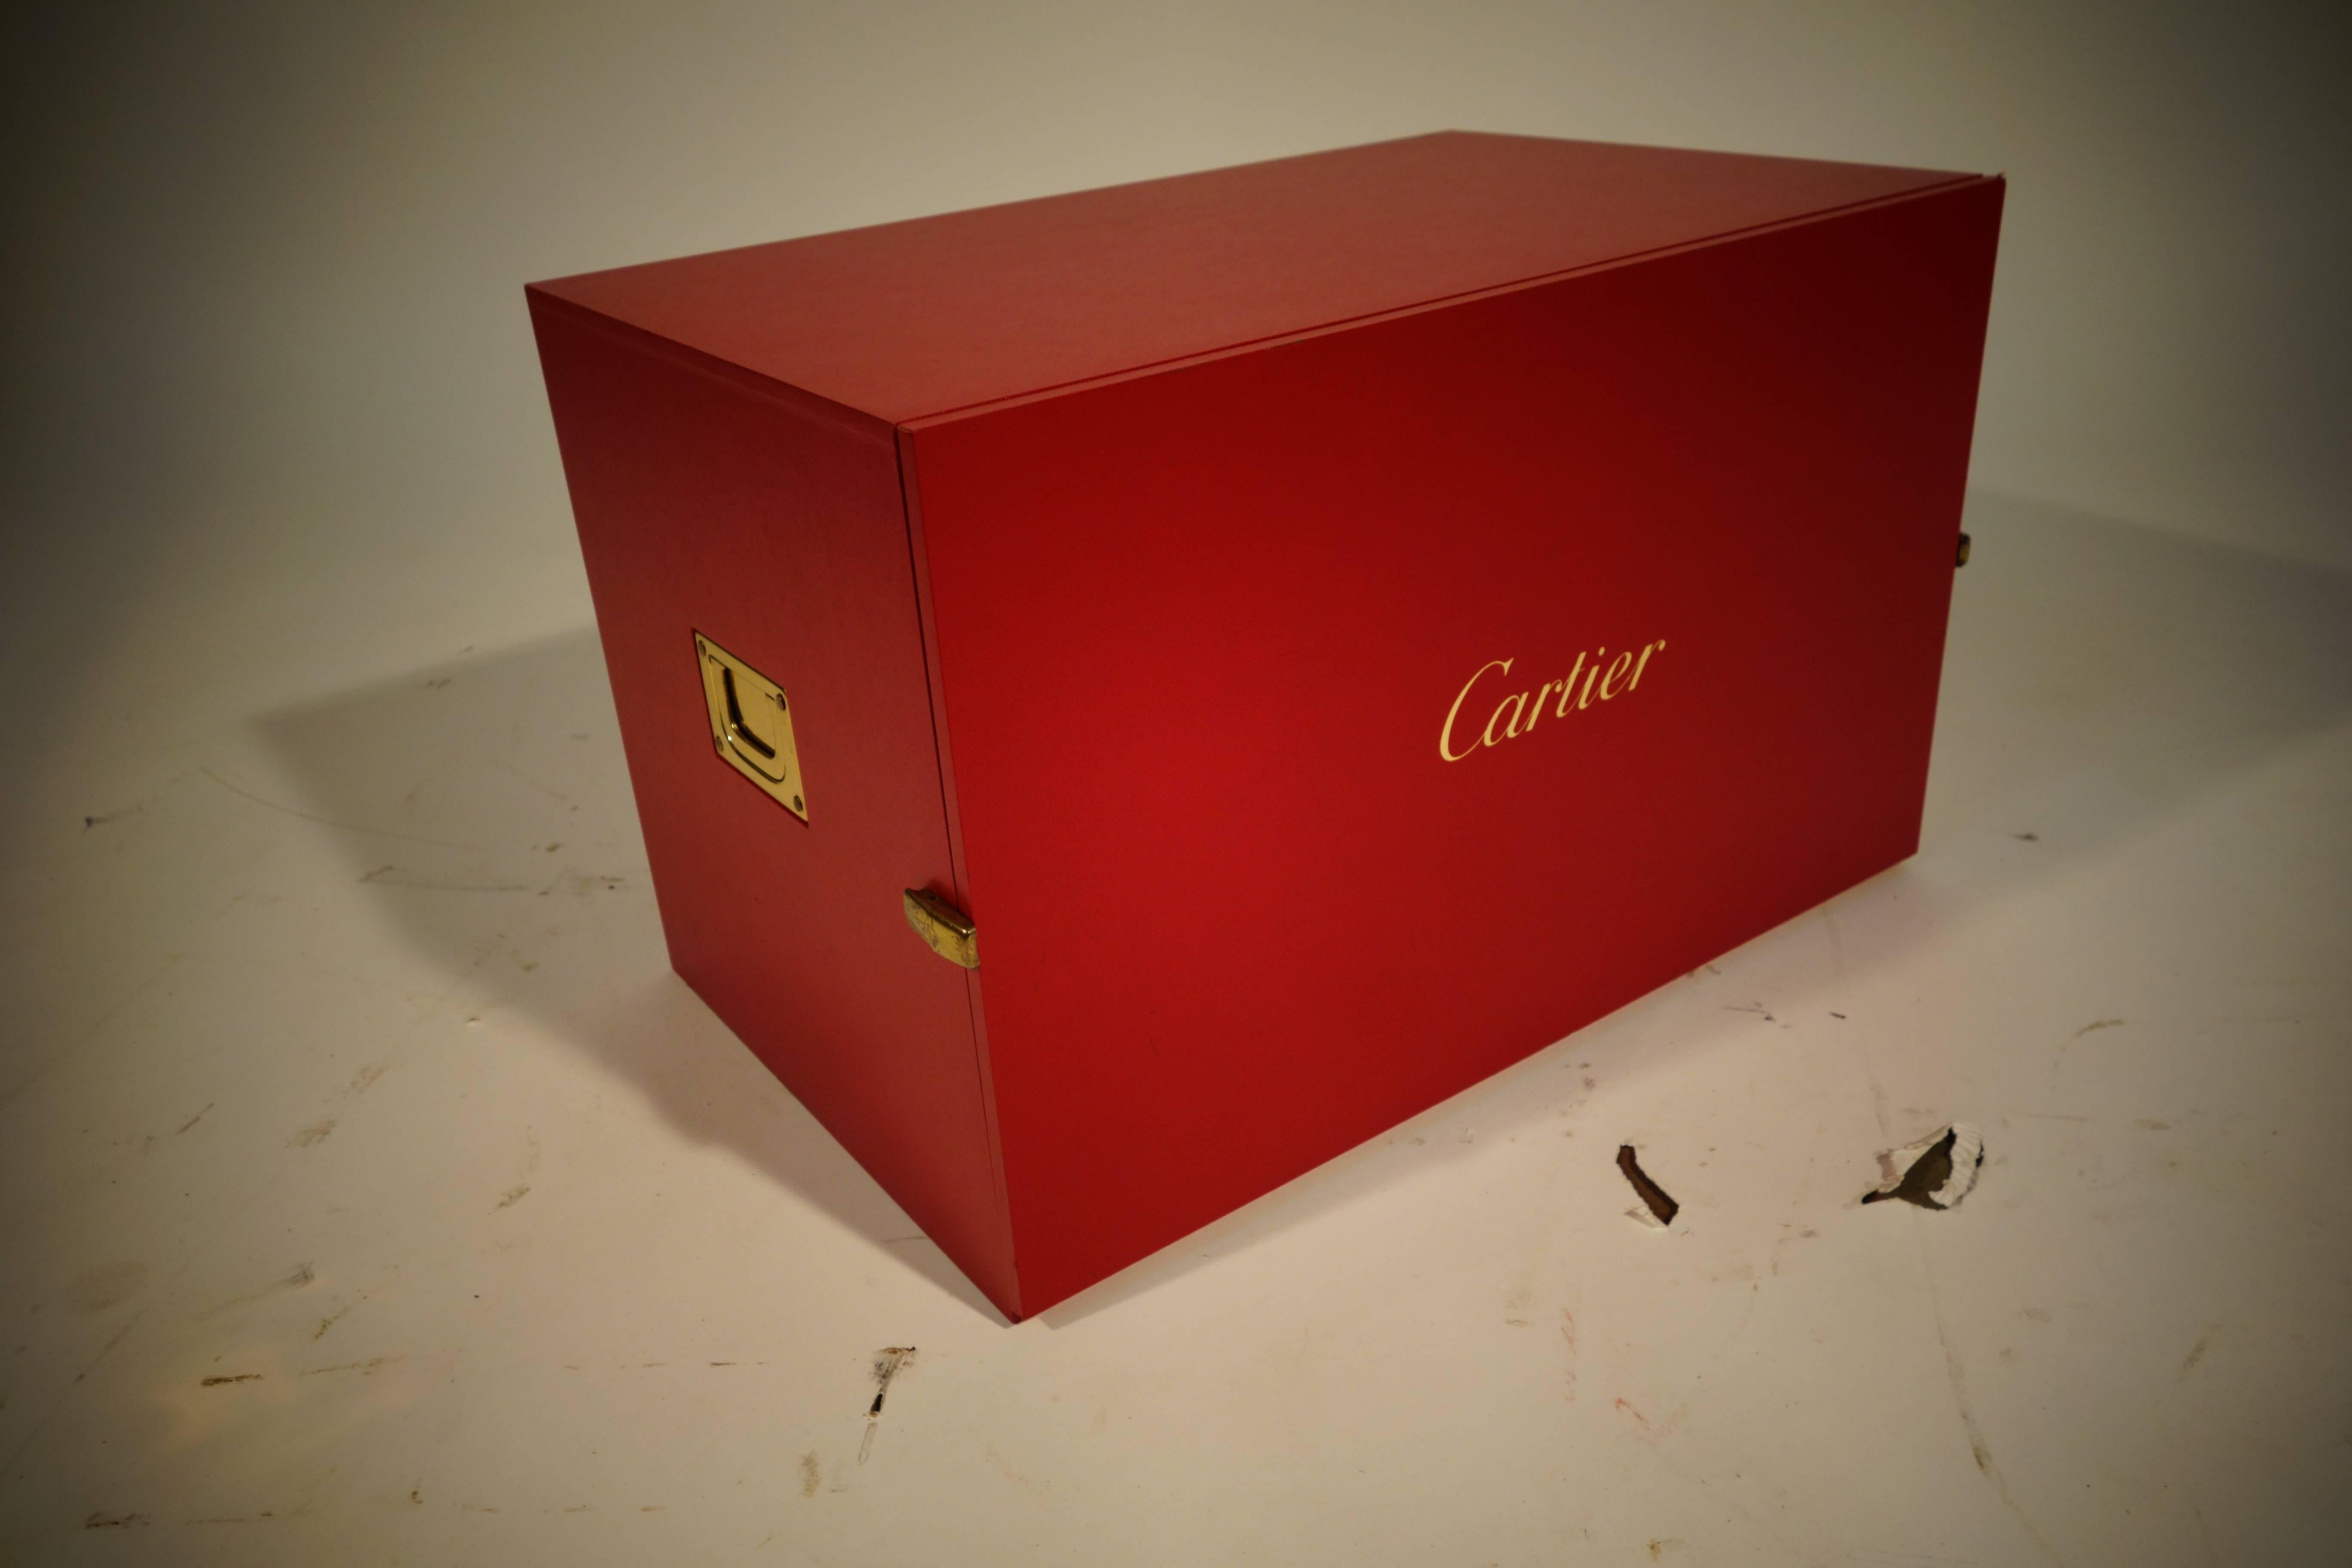 Cartier watch box for accessories.
You find this kind of boxes in Cartier Shop.
Free shipping. 

14 drawers.

Each drawer has a removable plastic separator for storing the accessories of watches and jewelry.

Size in cm 47 cm wide x 30 cm